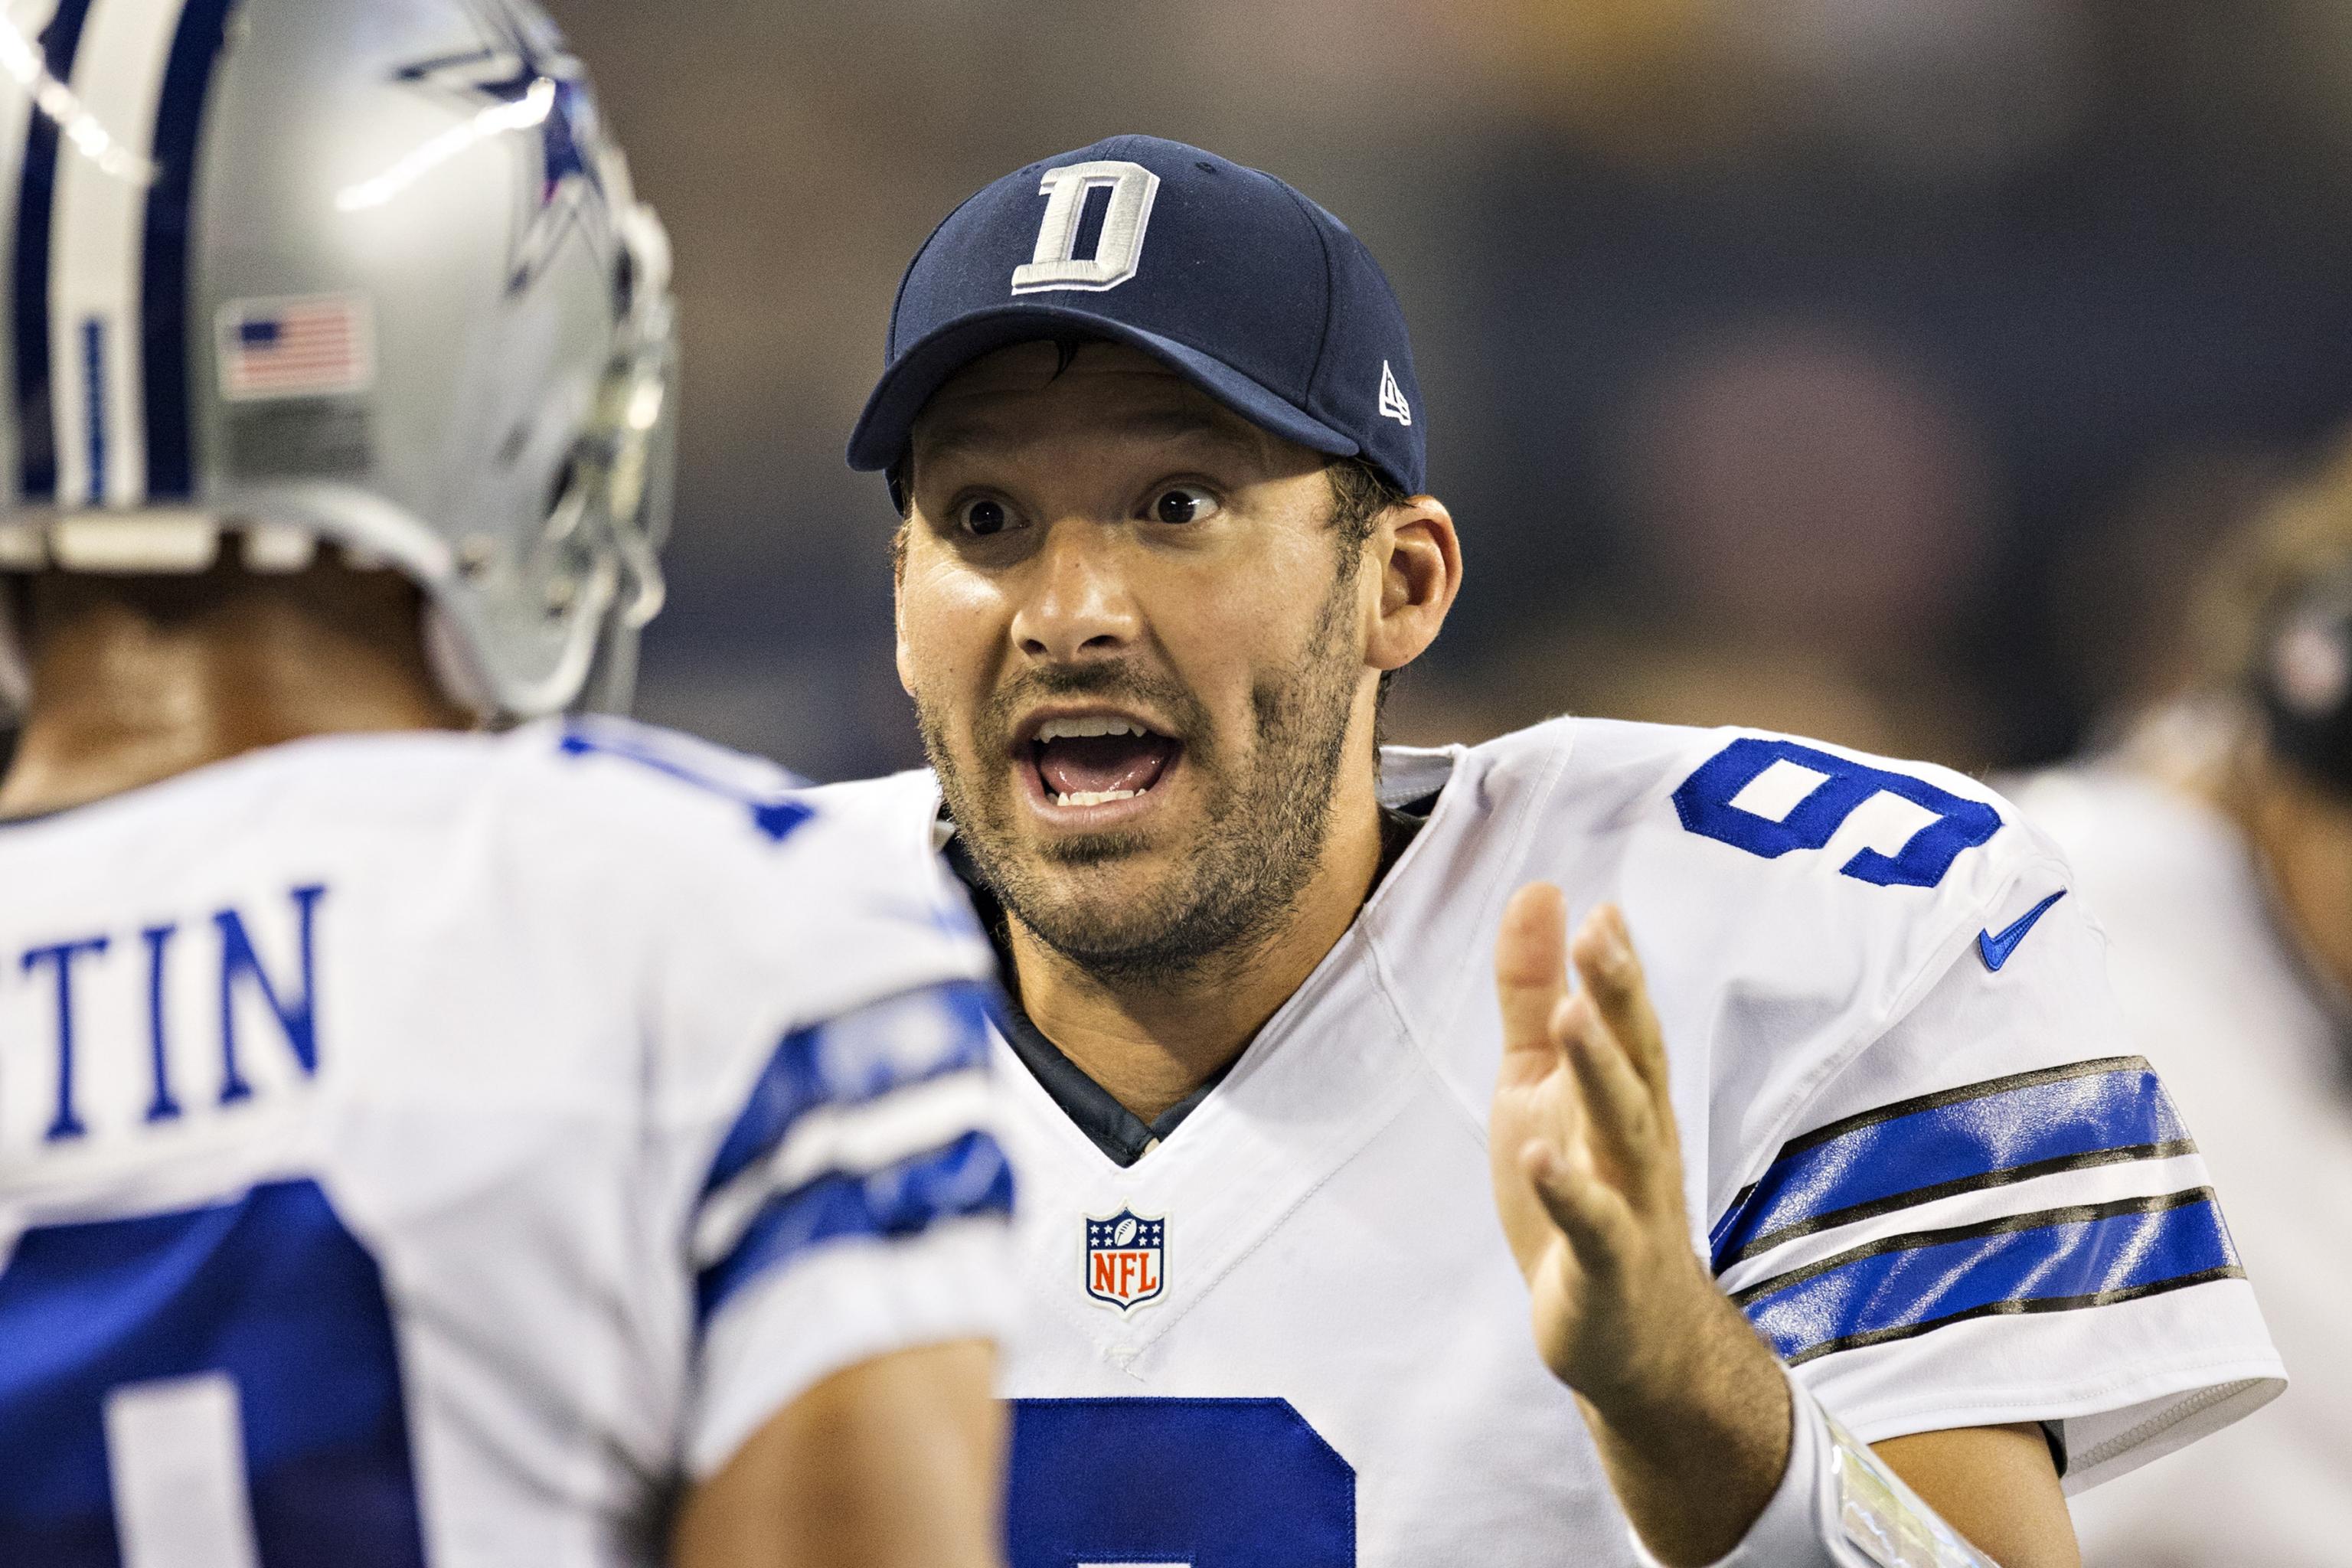 Tony Romo what are you doing?! 